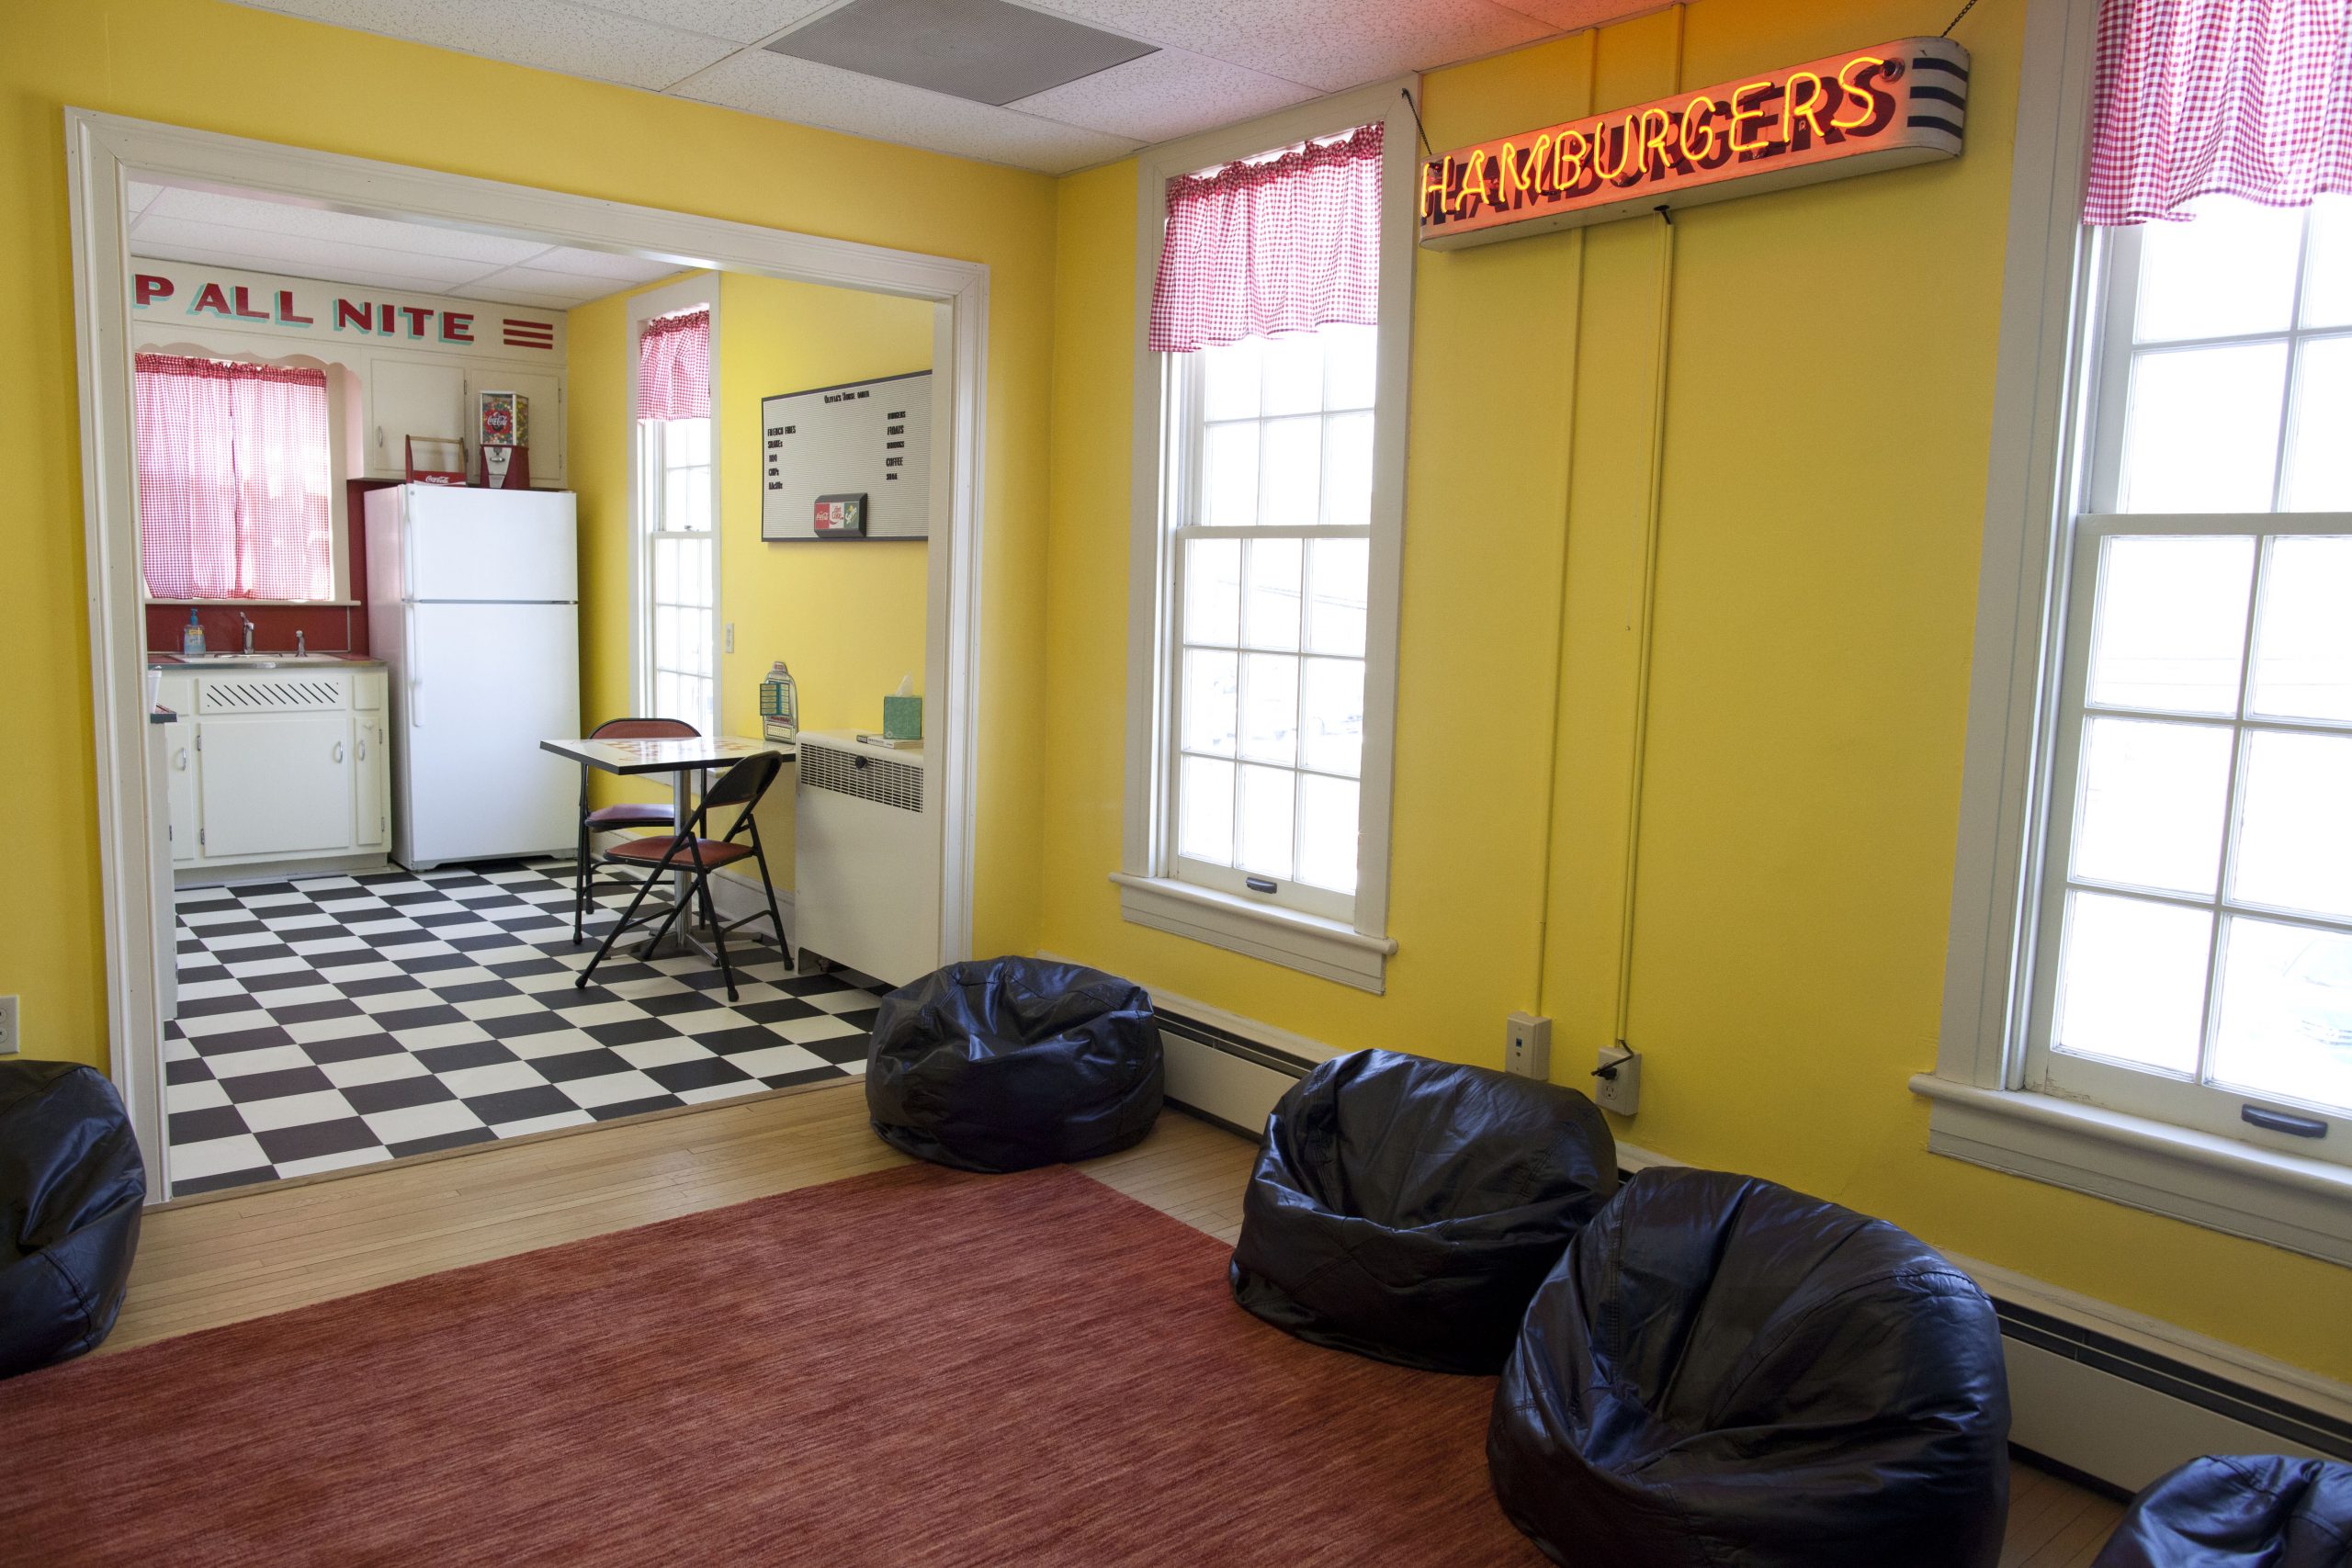 Designed to embrace the needs of grieving teens who are often up all hours of the night doing their grief work, we created a 24-hour diner themed room just for them!  “A local hotspot, “The Tropical Treat” donated the hamburger sign hanging in the window to help them realize that junk food can be an essential coping tool for a grieving teen. The kitchen, complete with a coffee bar and refrigerator full of soda and snacks, sets the stage for their grief work. The Teen Suite was lovingly gifted by the Don Smith Family.”